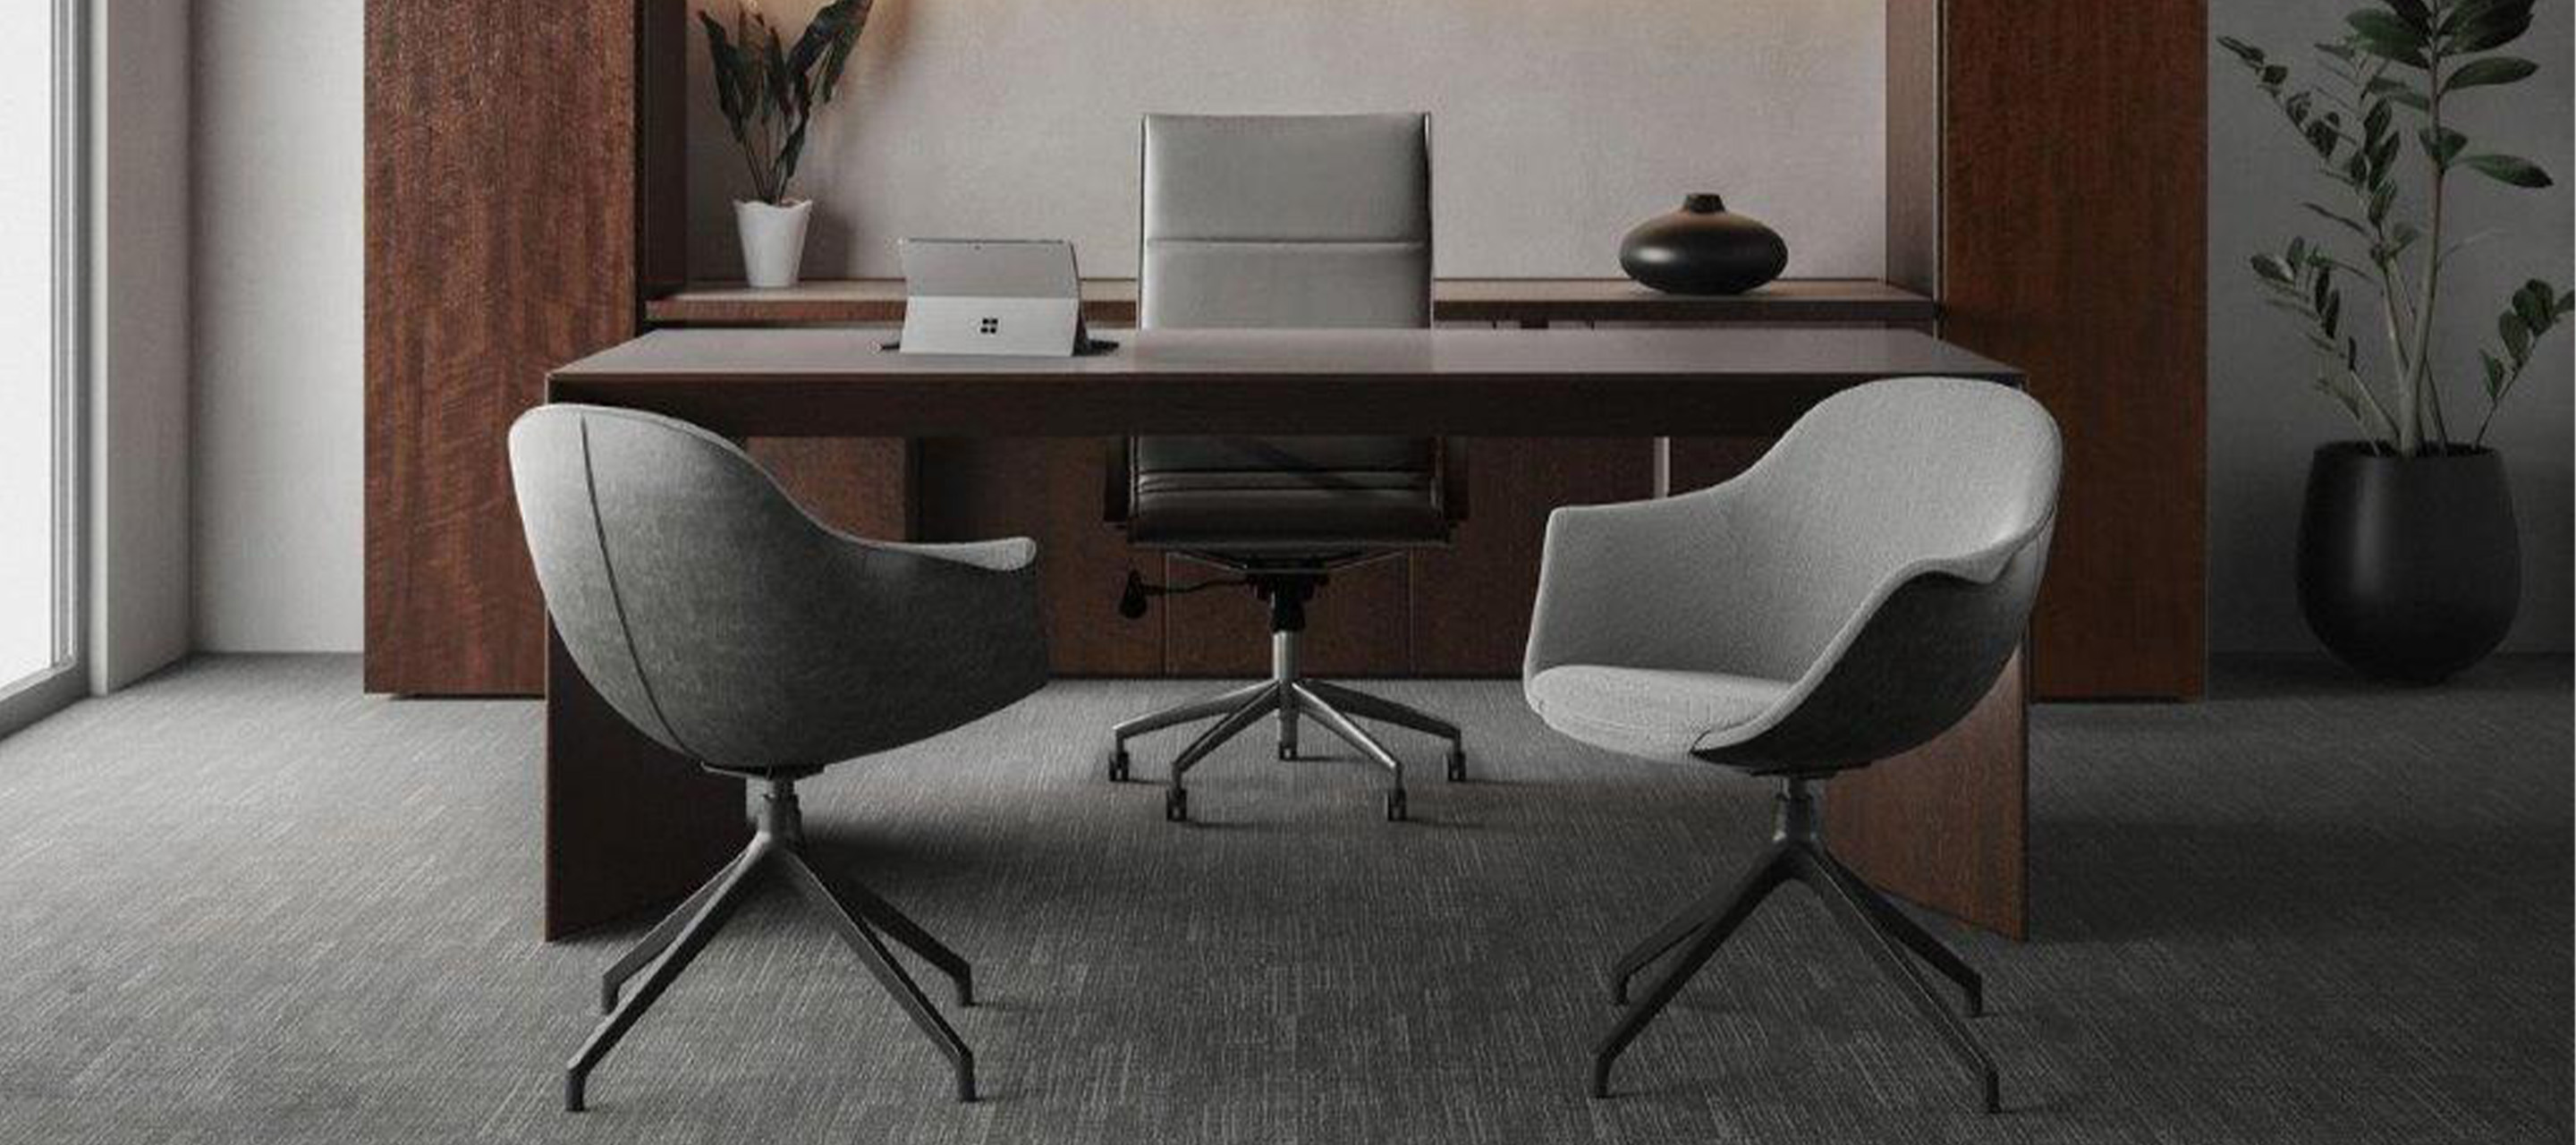 Haworth Tuohy chairs in a office space